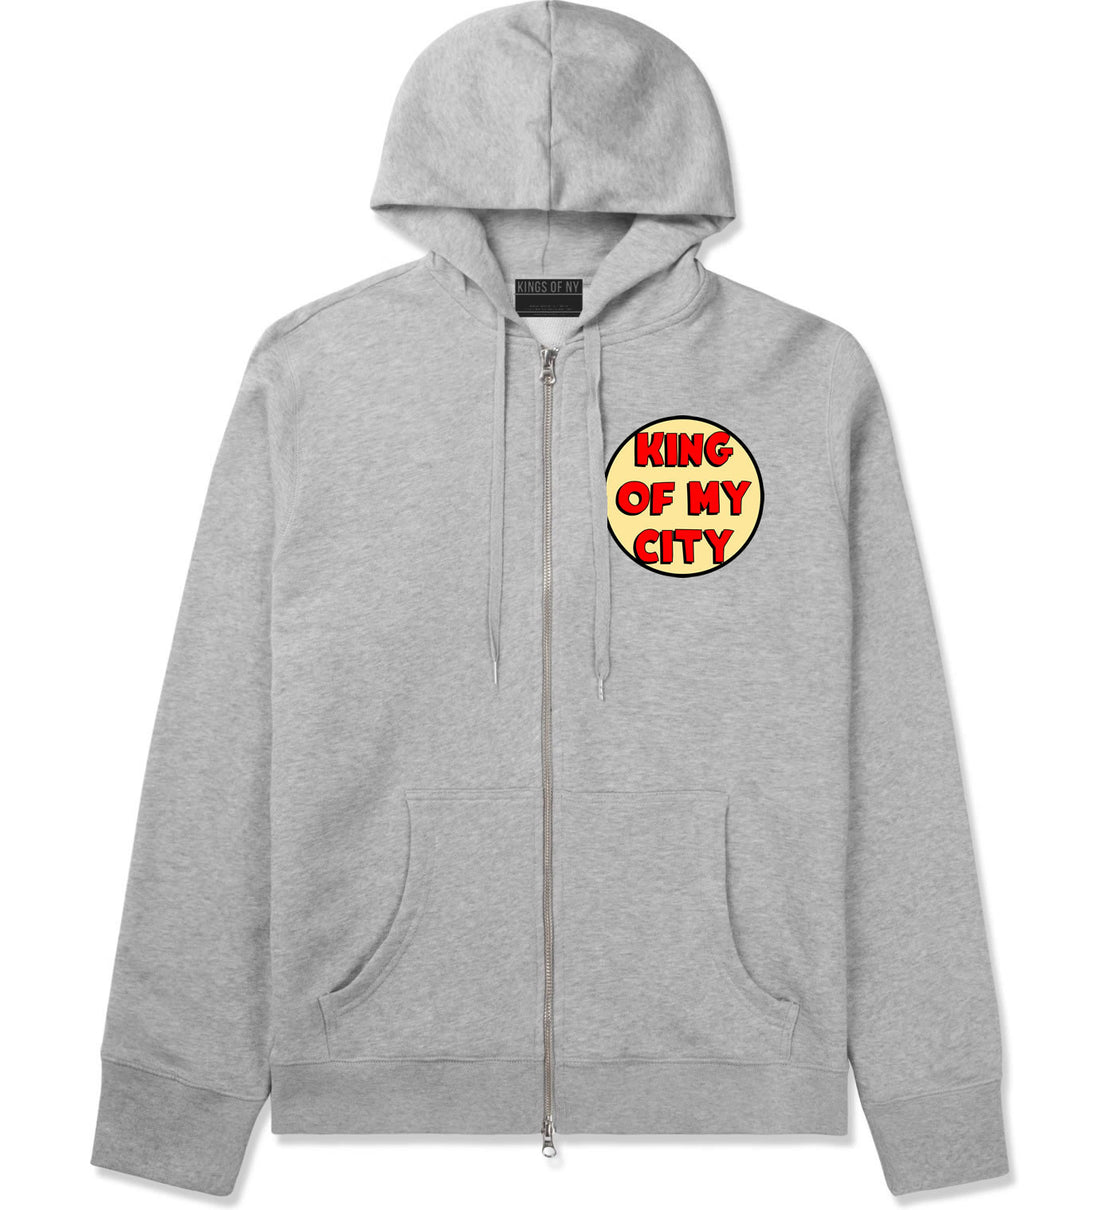 King Of My City Chest Logo Zip Up Hoodie Hoody in Grey by Kings Of NY